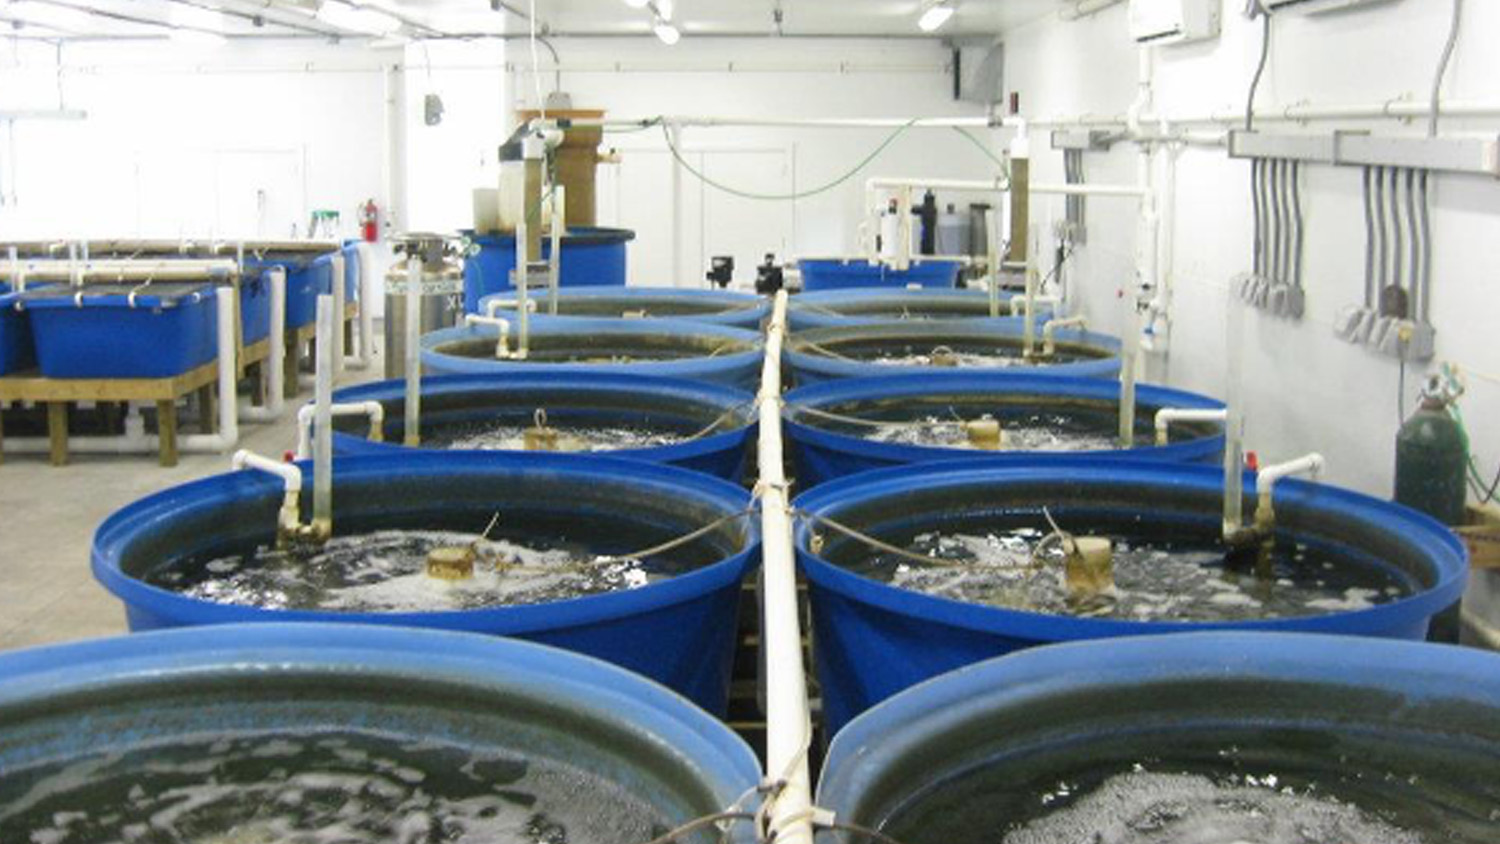 Eight large blue tanks lined up in two rows. Part of a RAS system